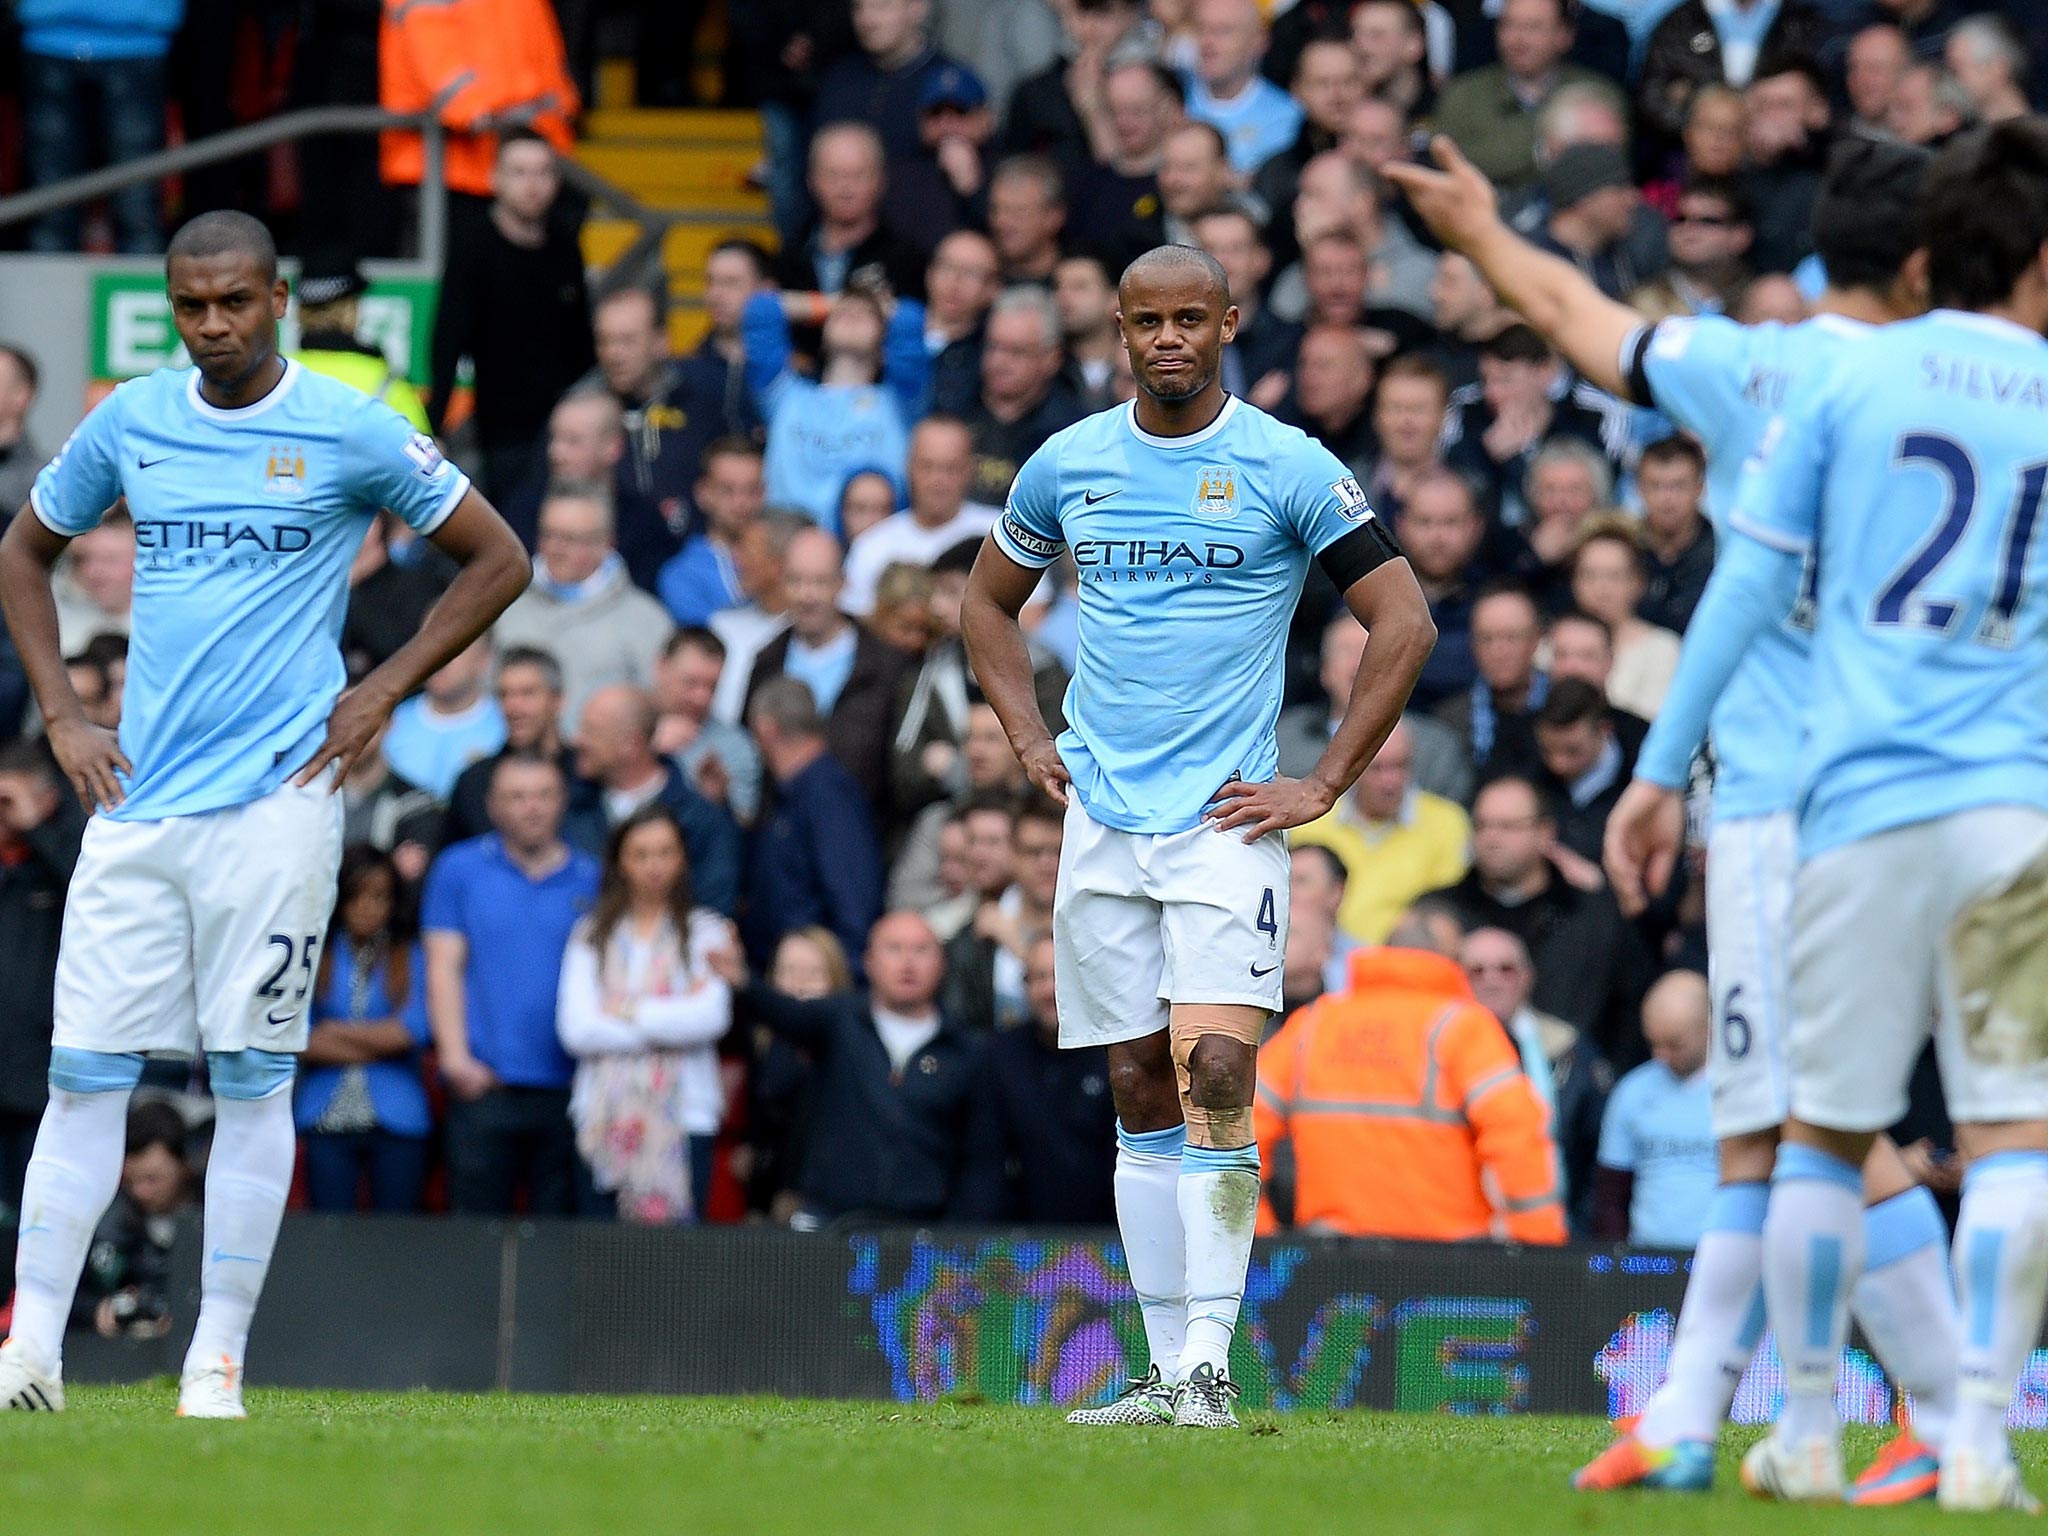 Vincent Kompany looks on after Liverpool score the winning goal in the 3-2 Premier League fixture